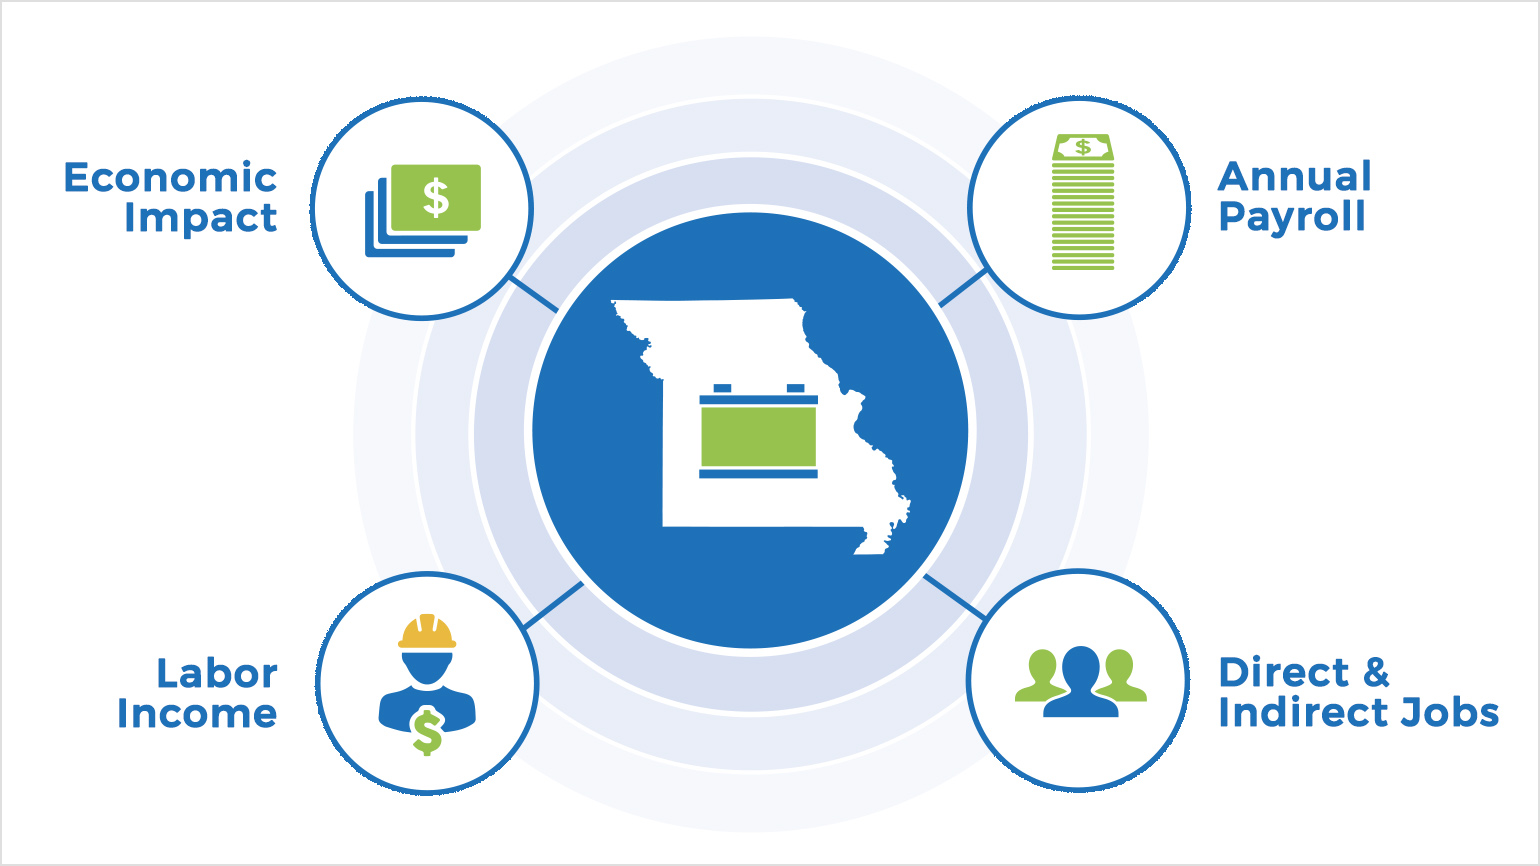 Missouri’s lead battery industry supports the statewide economy, annual payroll, labor income, and direct and indirect jobs.